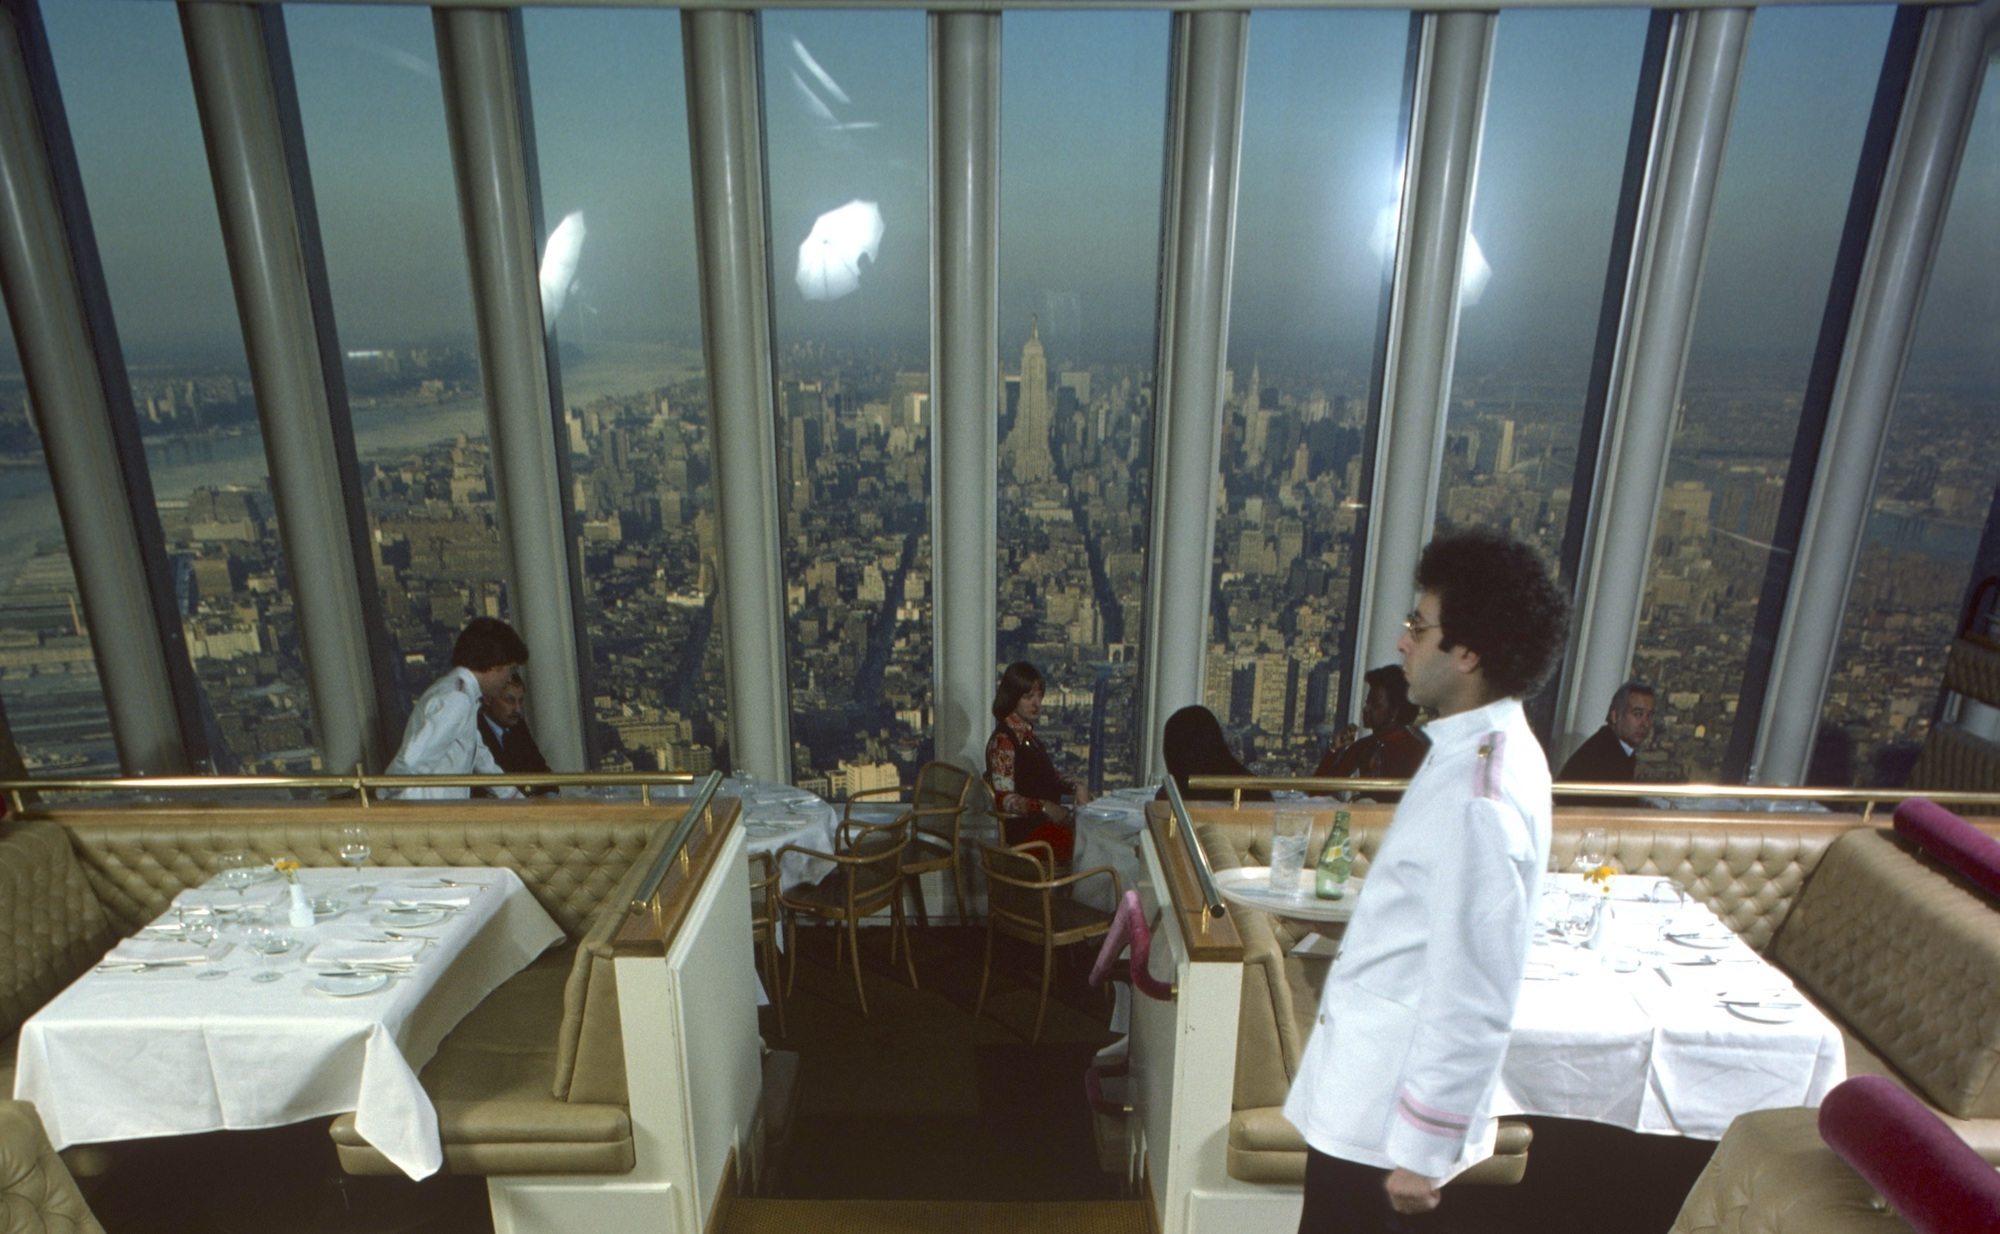 A view of the kitchen prep of the restaurant Windows on the World (on the 107th floor of the World Trade Center), New York, New York, January 1977. September 2021